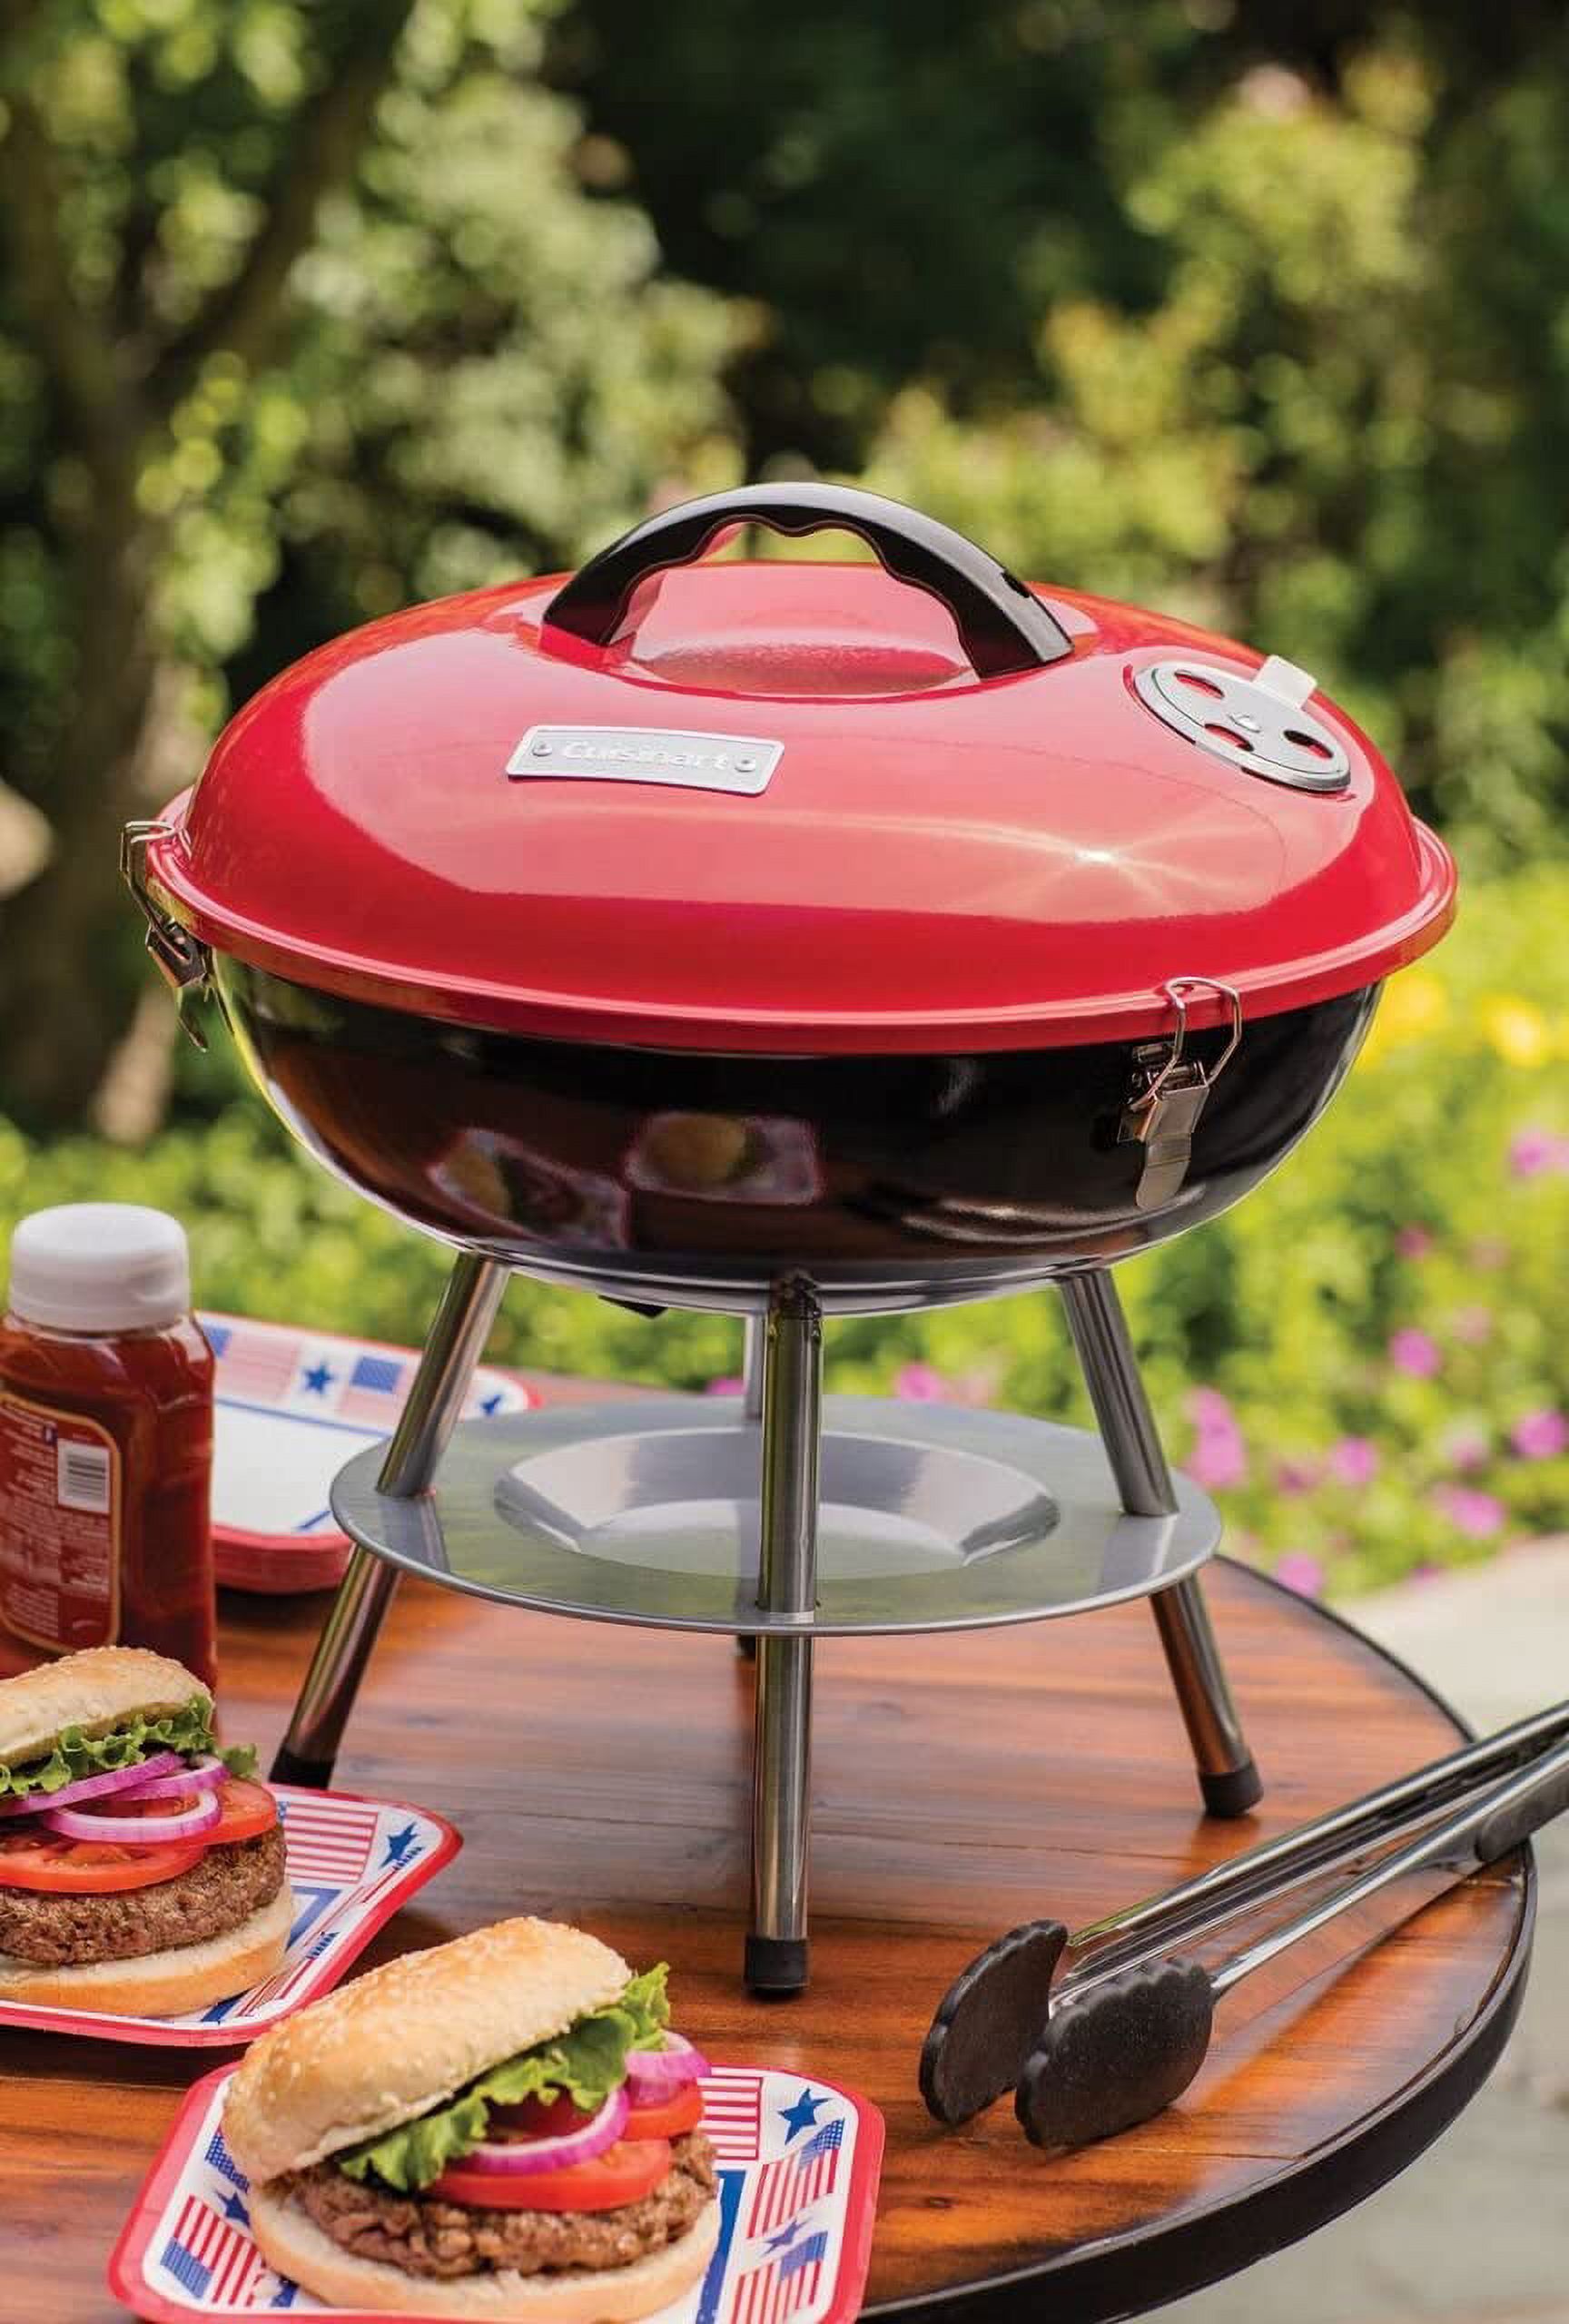 Cuisinart CCG190RB Inch BBQ, 14" x 14" x 15", Portable Charcoal Grill, 14" (Red) - image 2 of 2